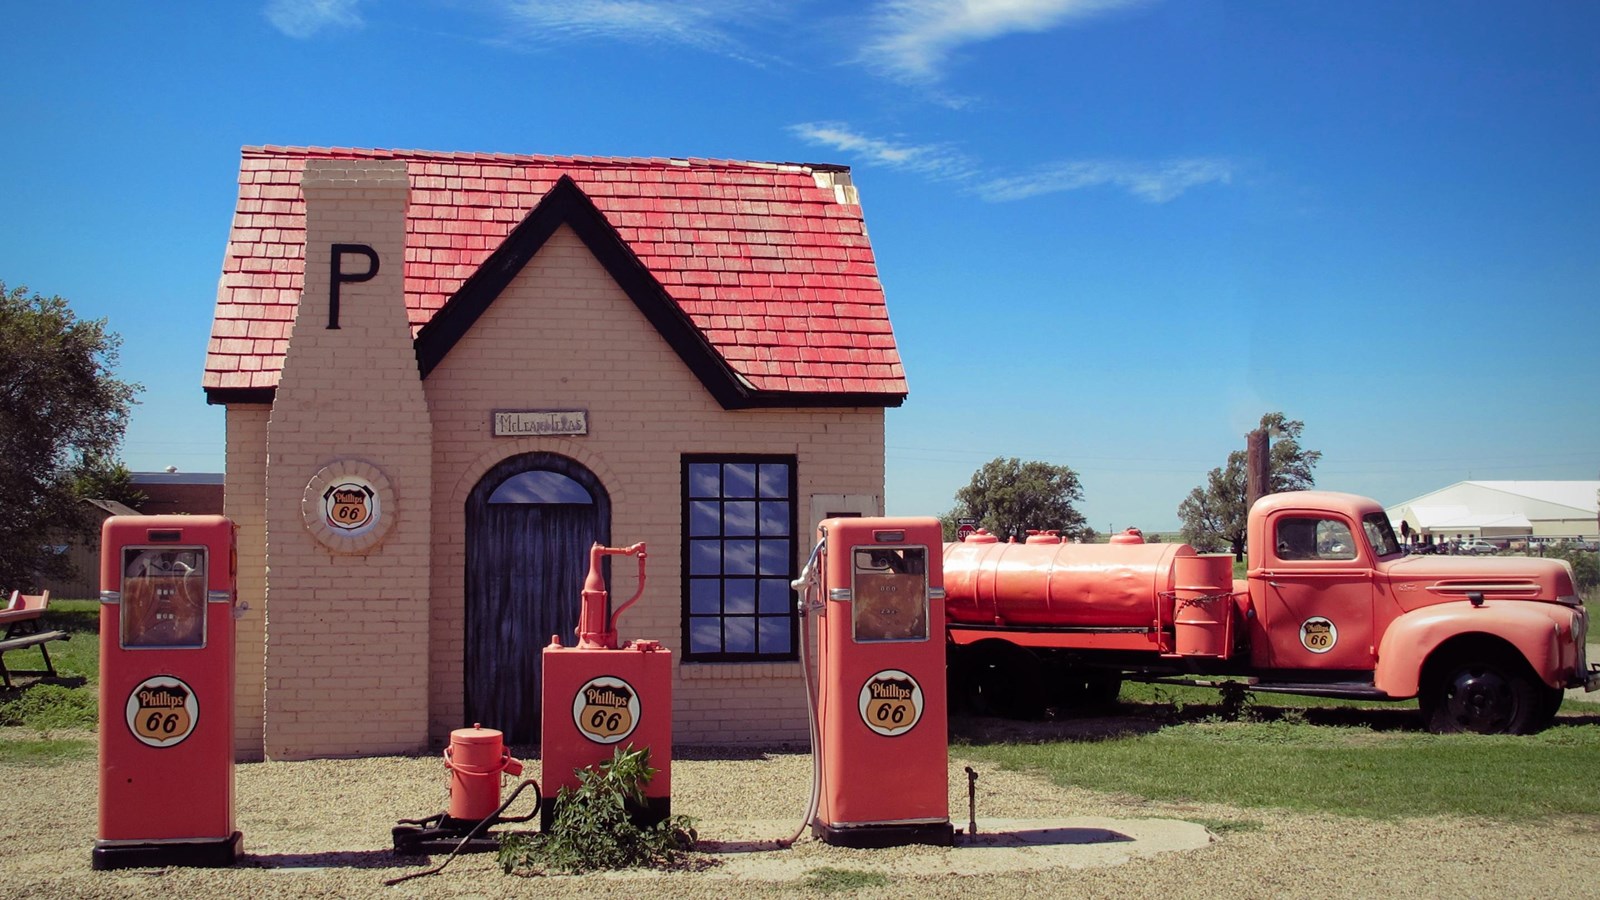 A small tan building with red roof. Out front are old red gas pumps and an old red pickup truck.